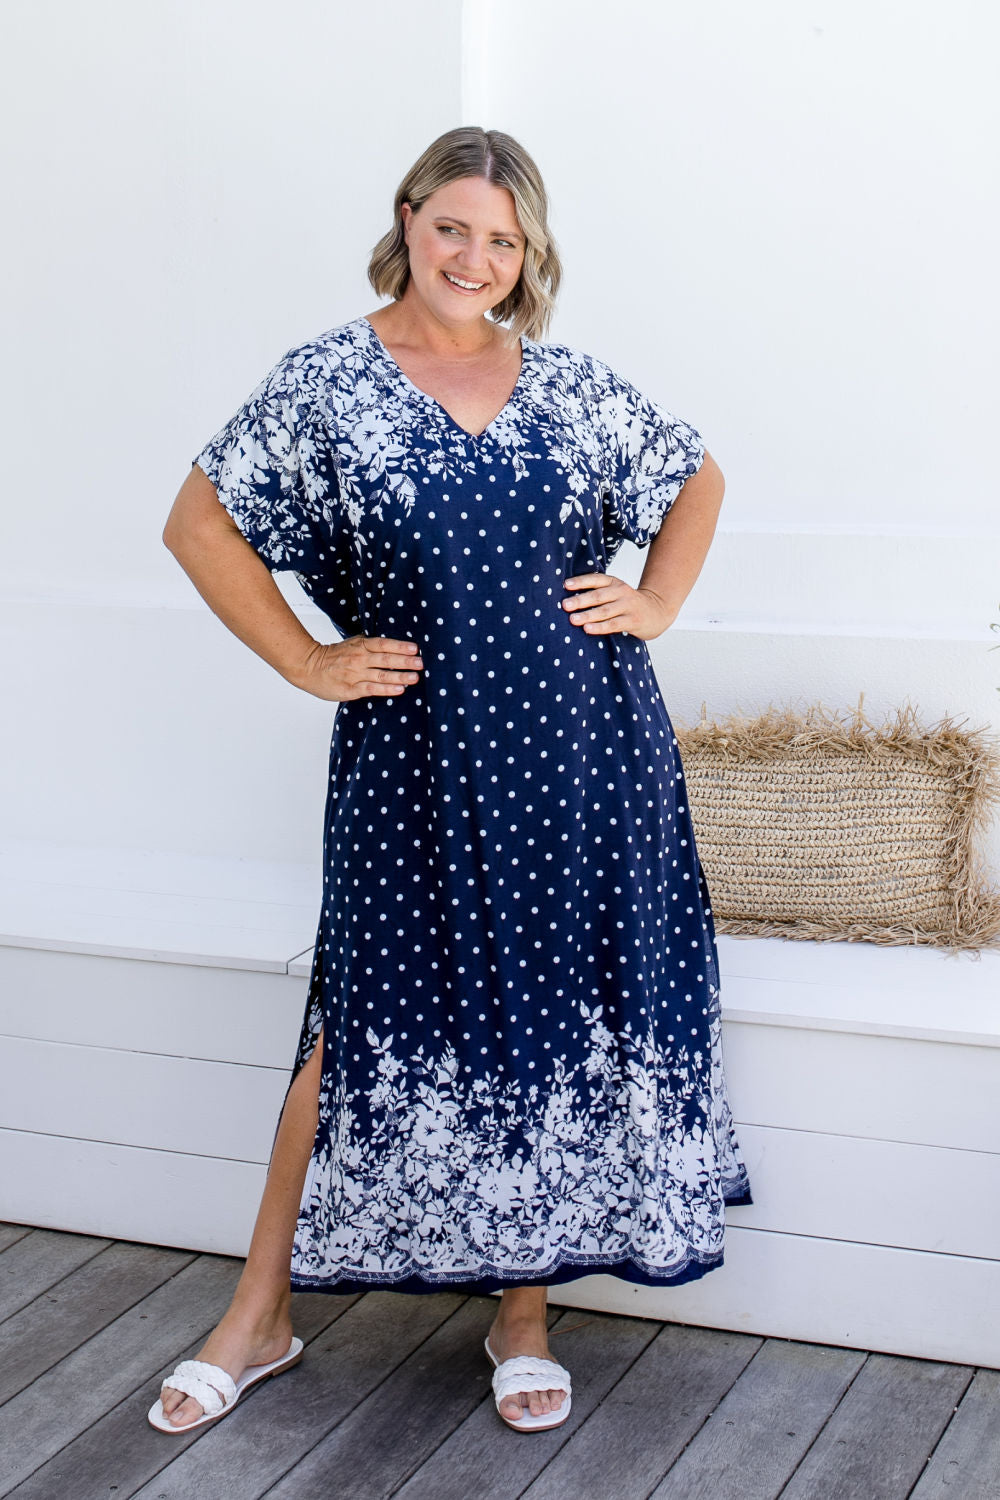 Plus Size Kaftans Cover Ups Holley Day Australia